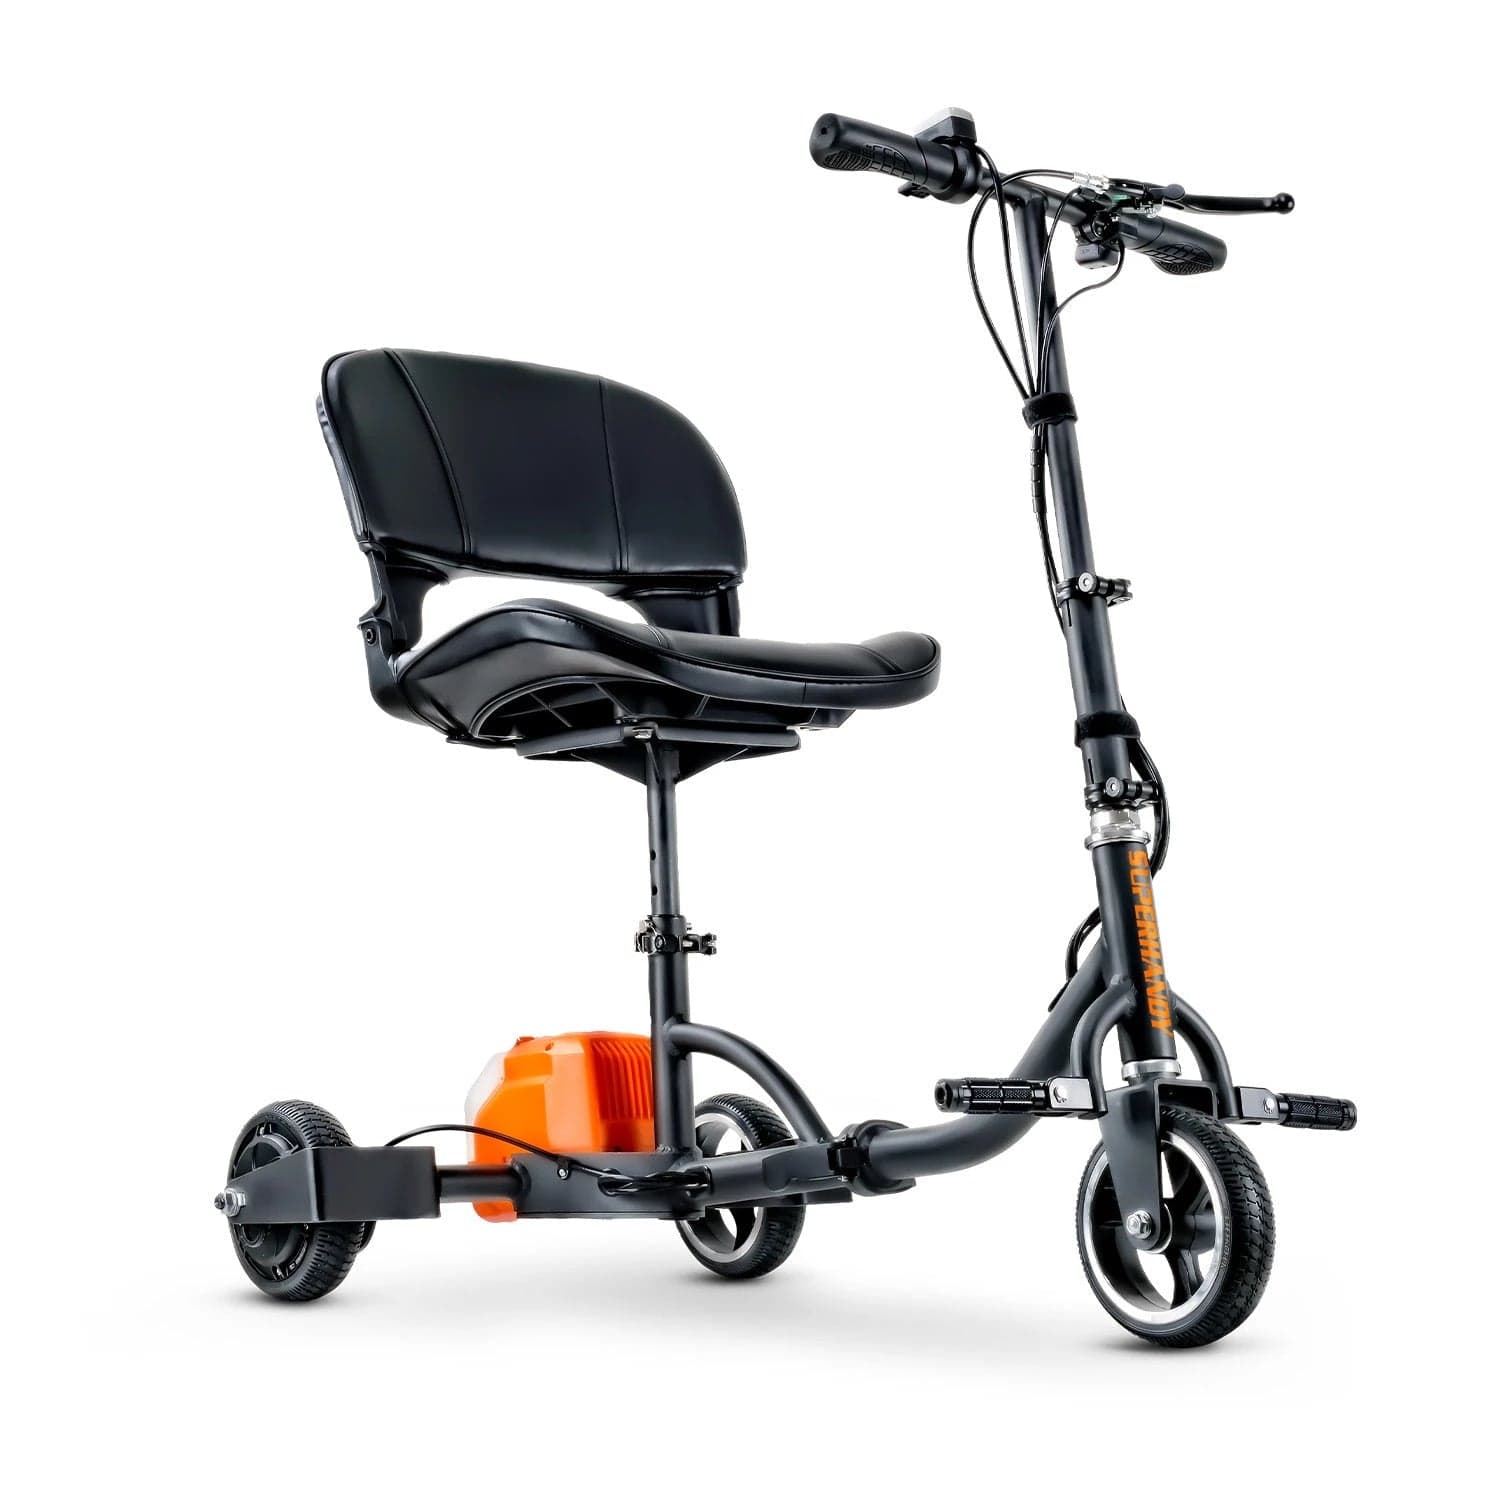 SuperHandy Mobility Scooter - The Electric - - & Scooter Outdoor Mobility Lightest Mobility Shop Equipment Power SuperHandy